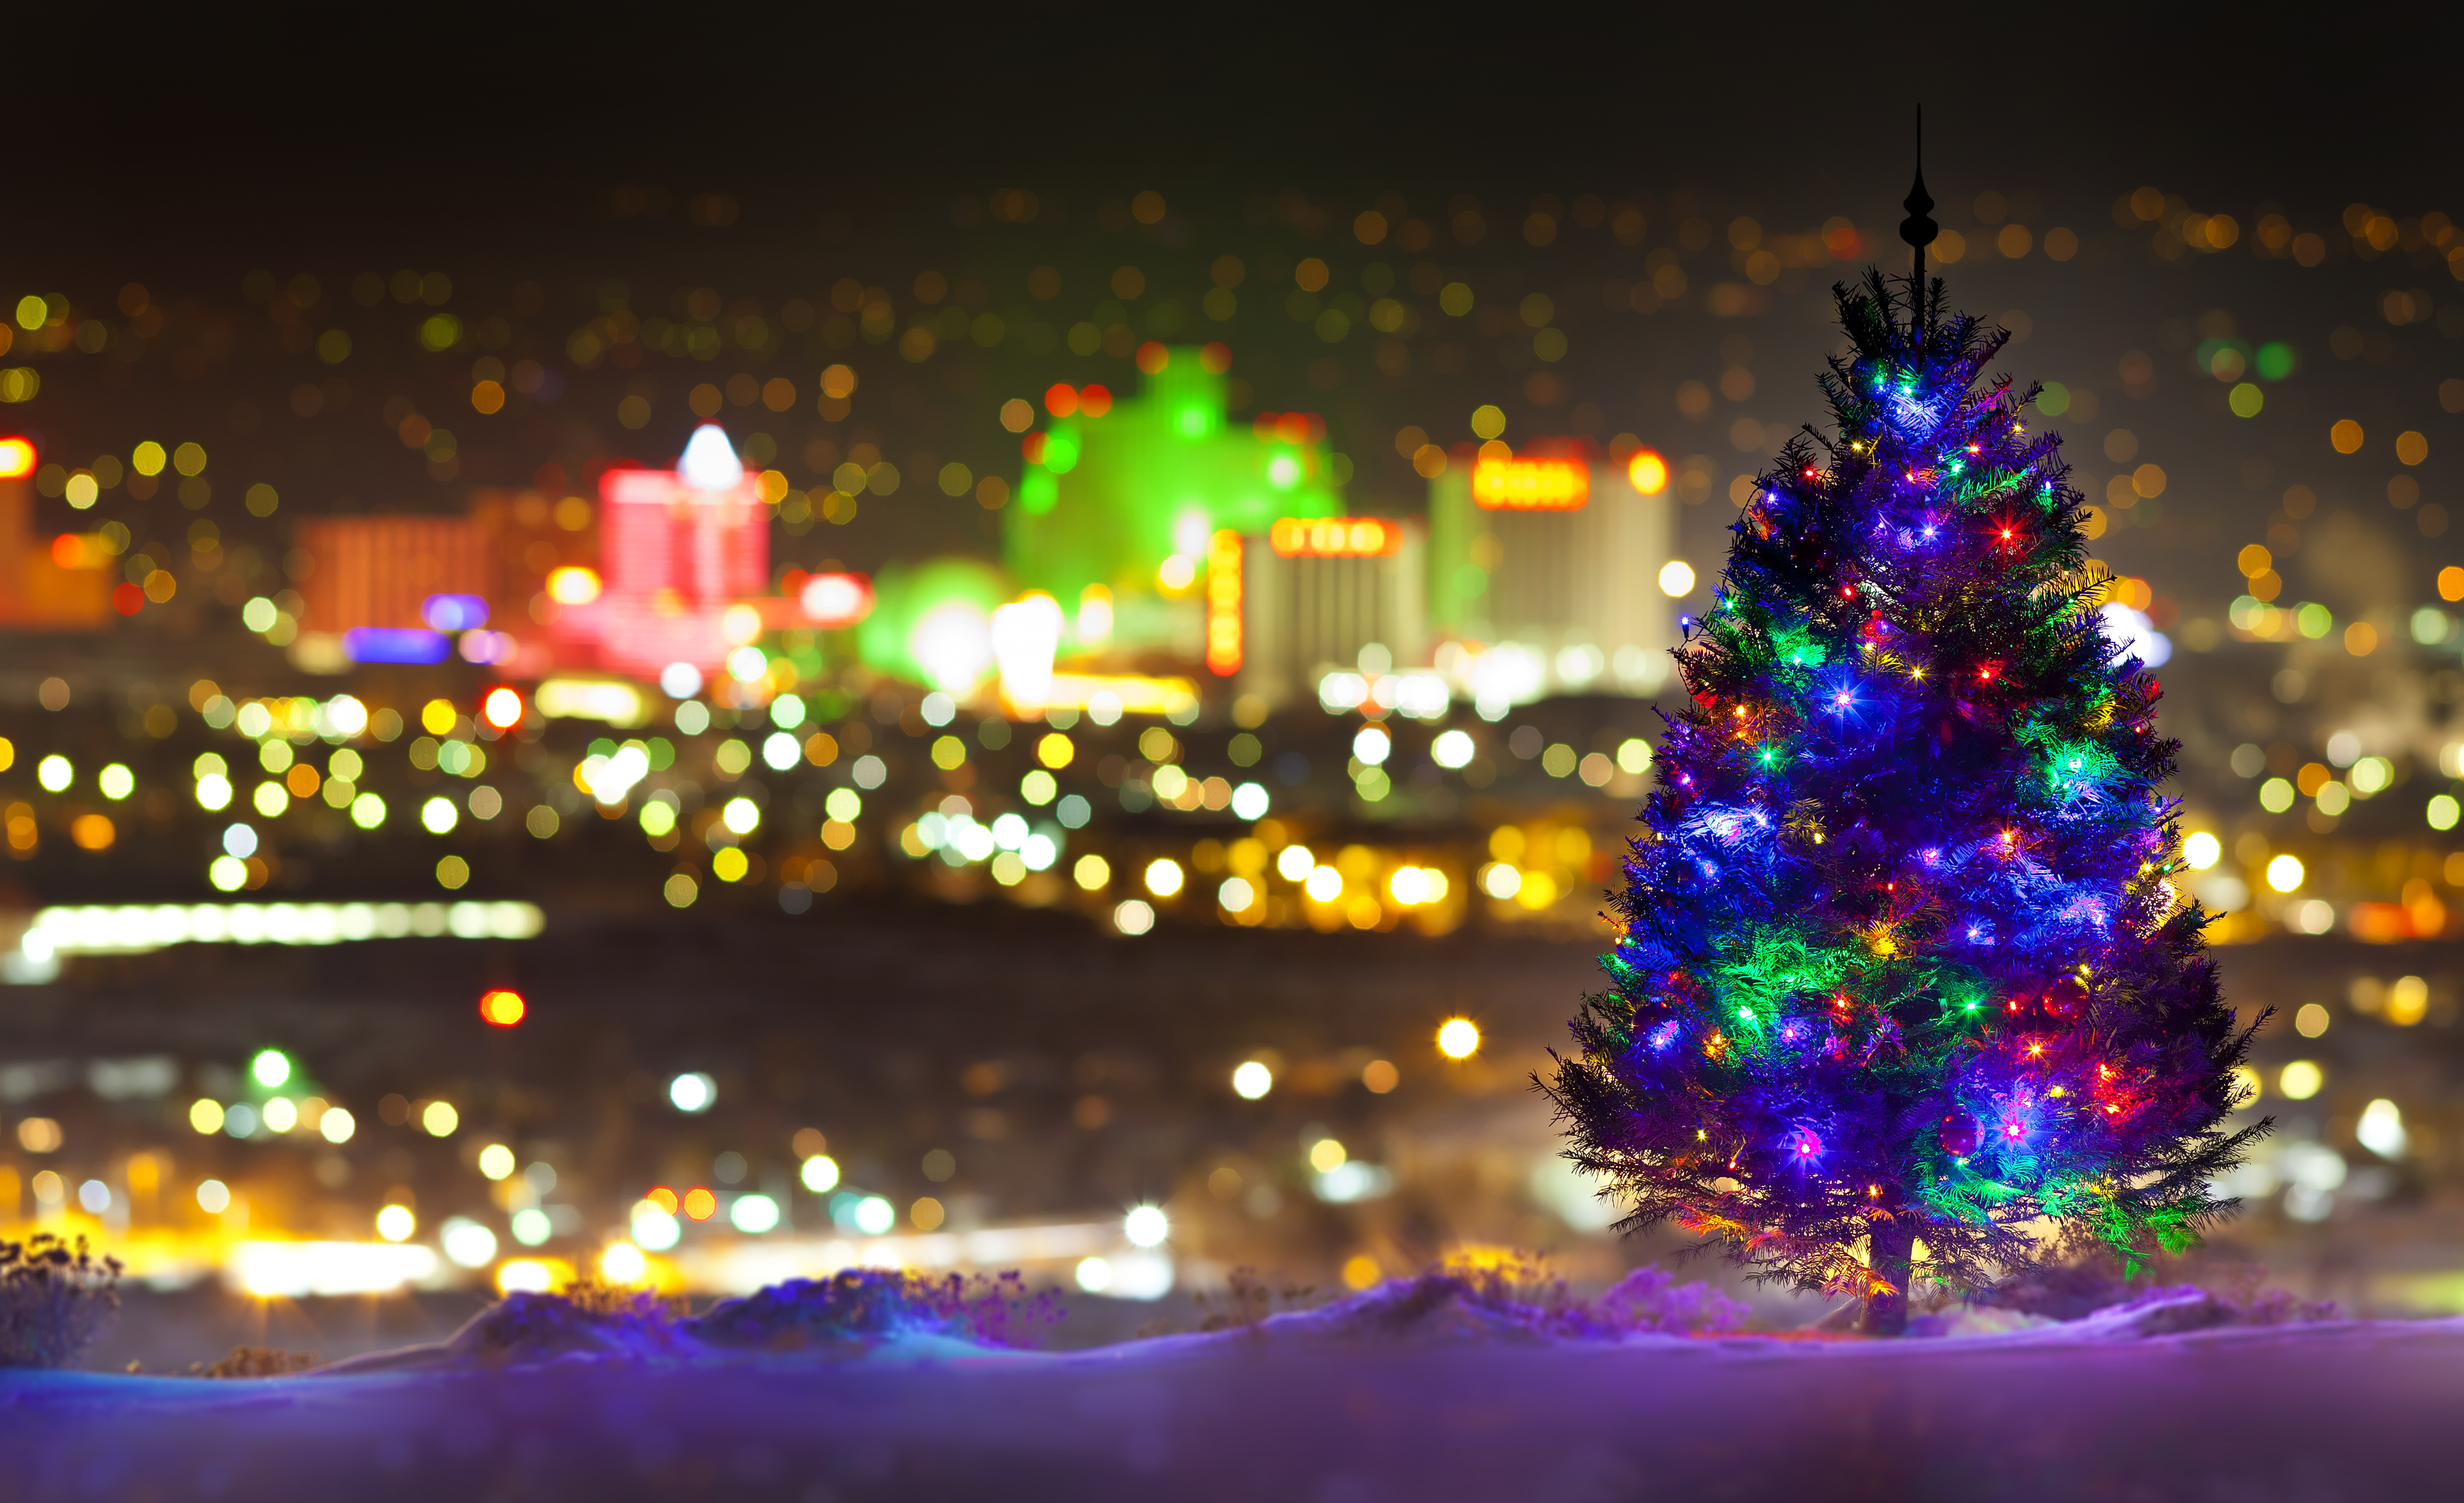 12 Ways You’ll Want To Celebrate The Holidays In Reno/Sparks